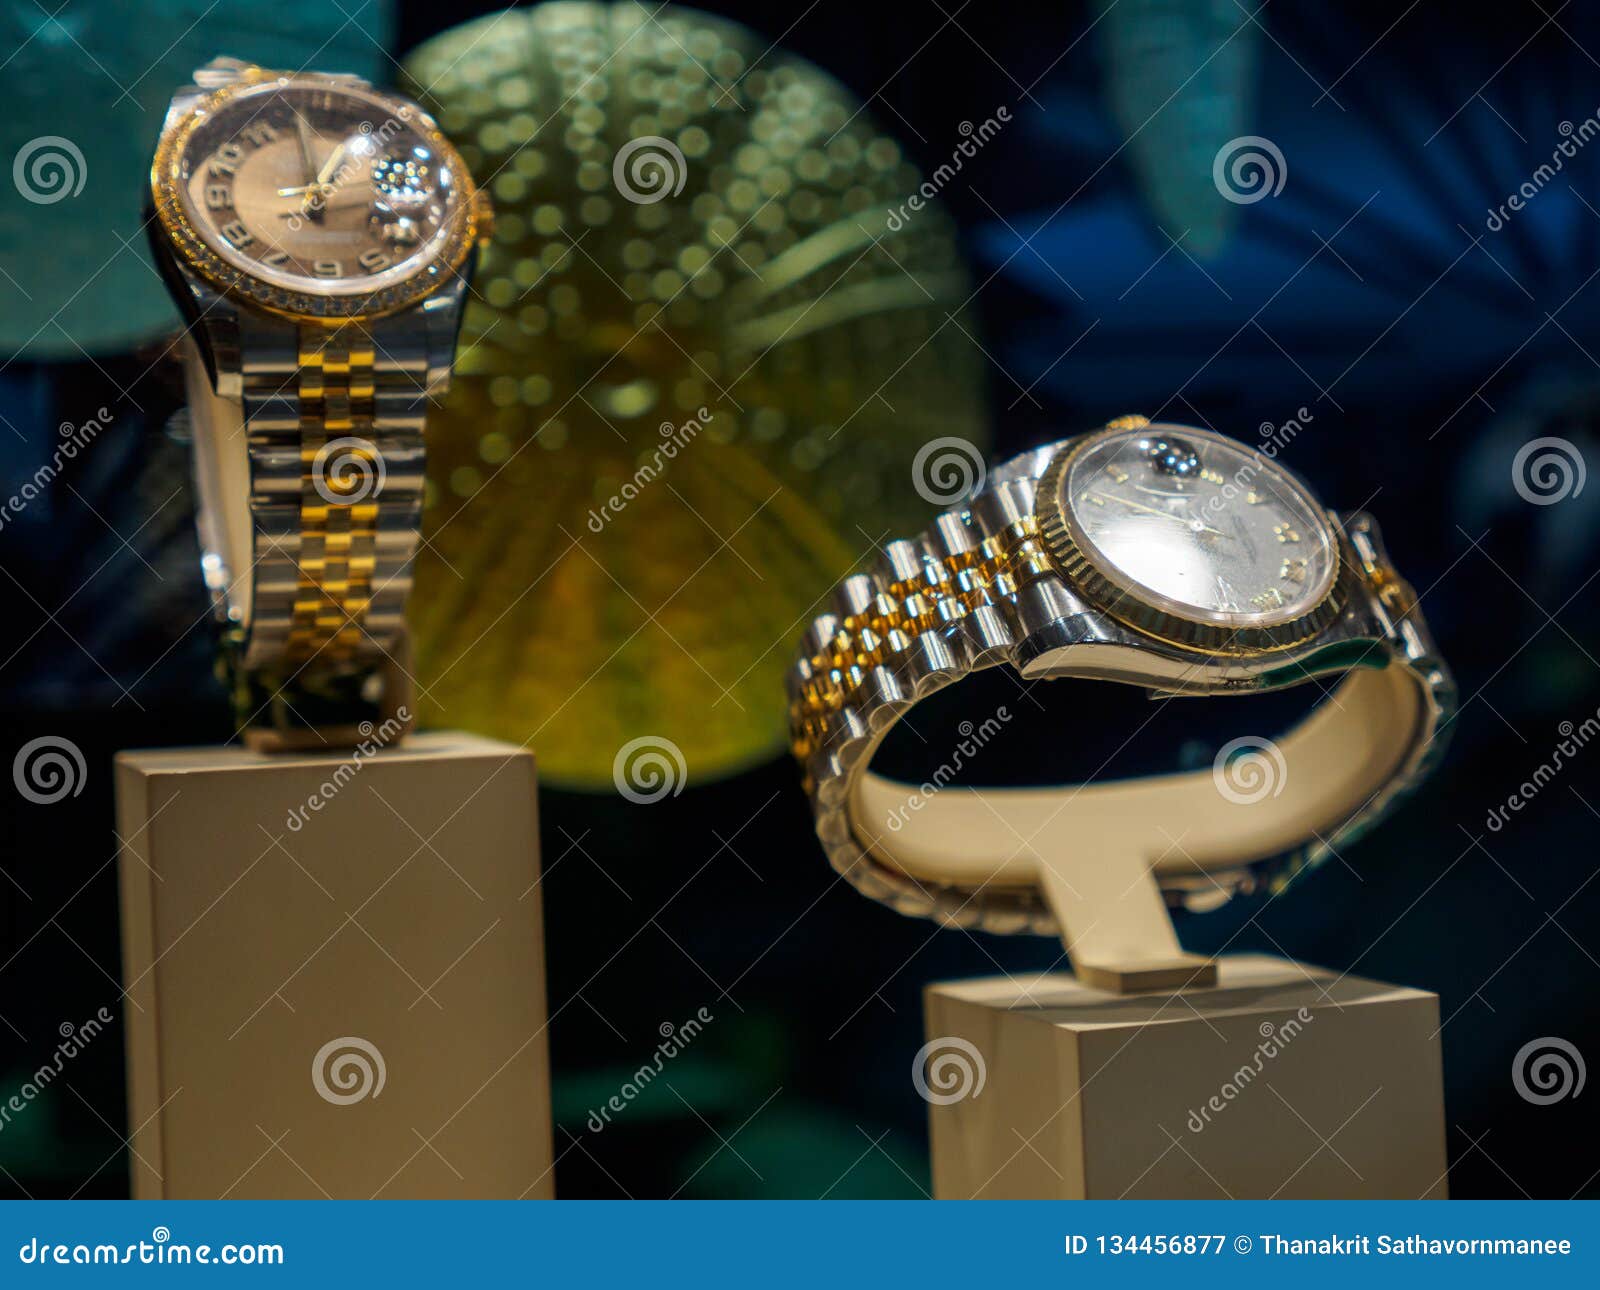 Multiple Rolex Watches On Display 